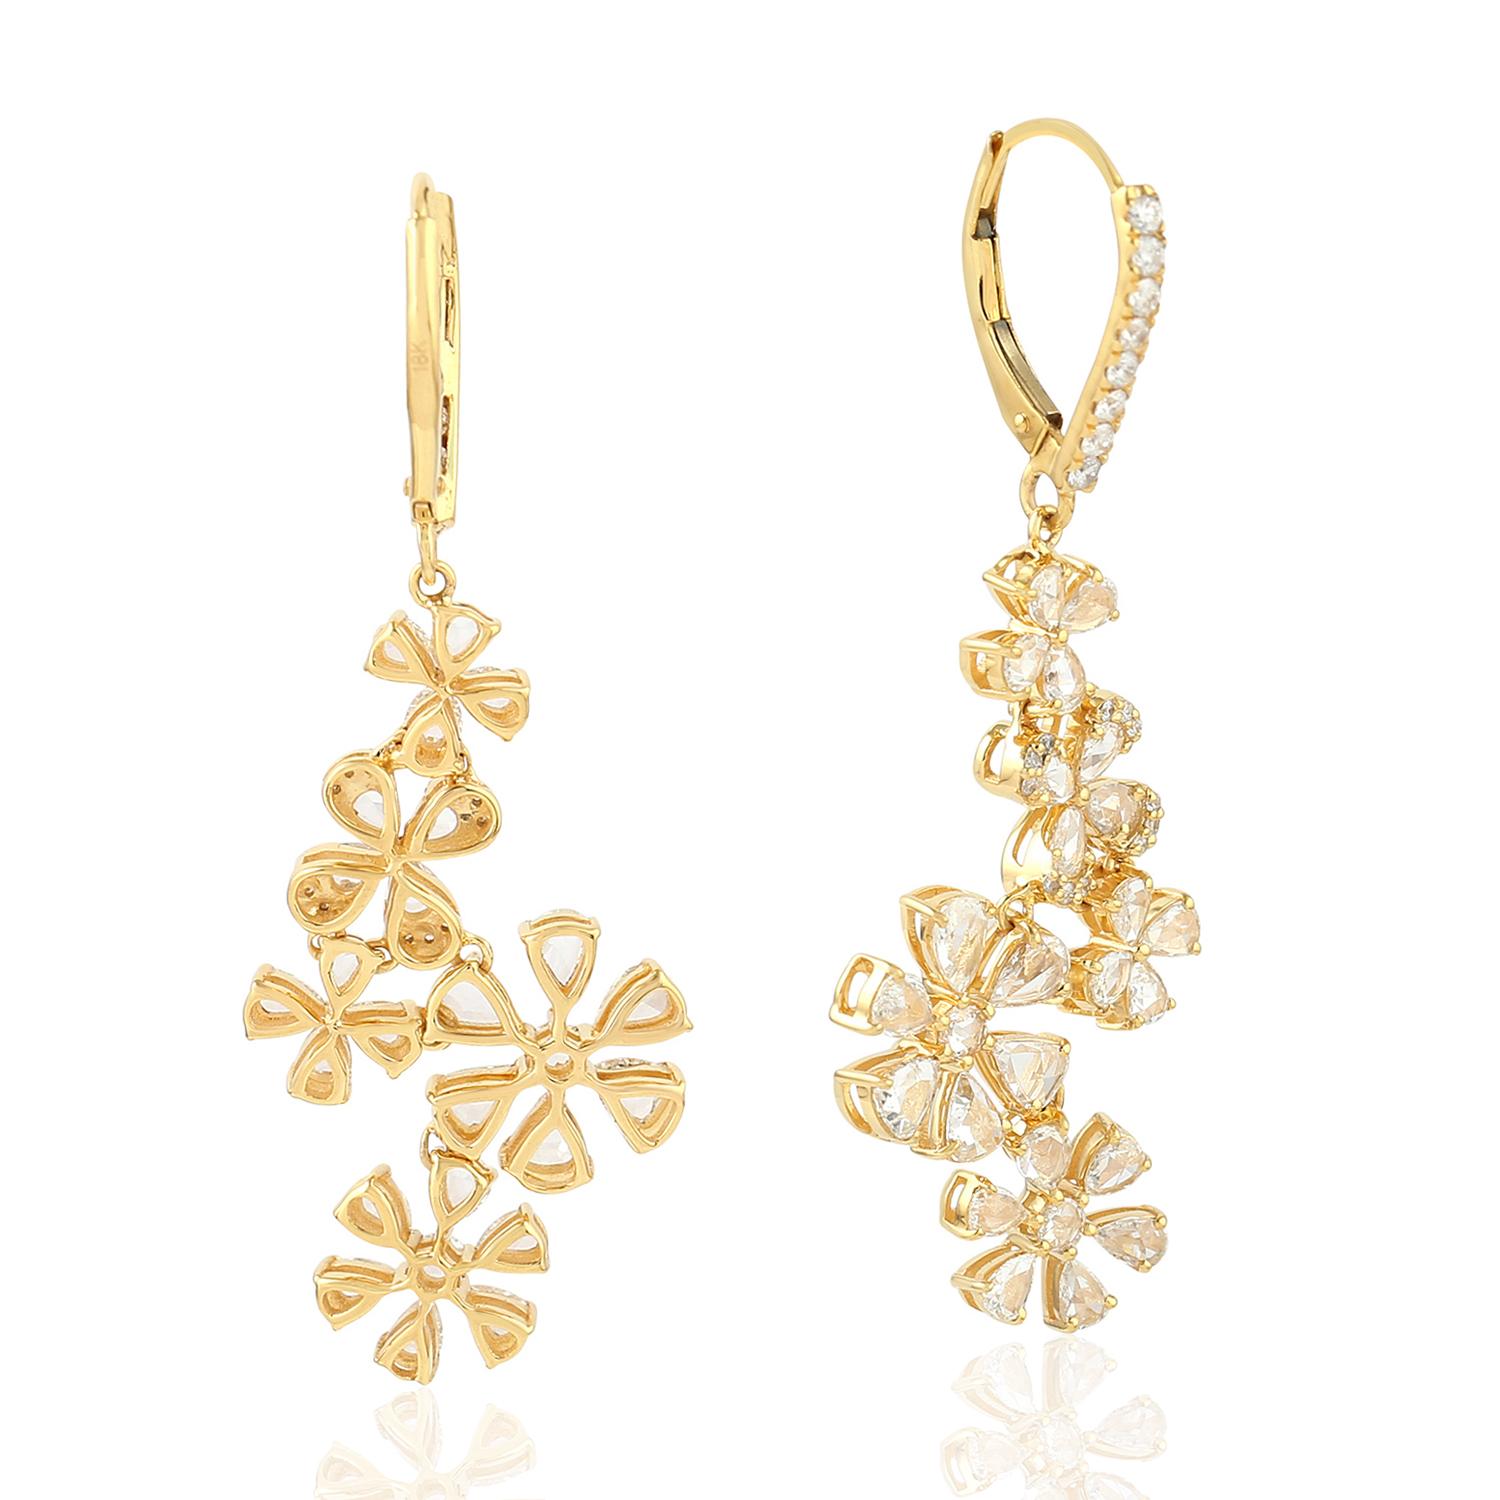 These rose cut diamond earrings are handmade in 18-karat gold and encrusted with 2.69 carats of diamonds. 

FOLLOW  MEGHNA JEWELS storefront to view the latest collection & exclusive pieces.  Meghna Jewels is proudly rated as a Top Seller on 1stdibs